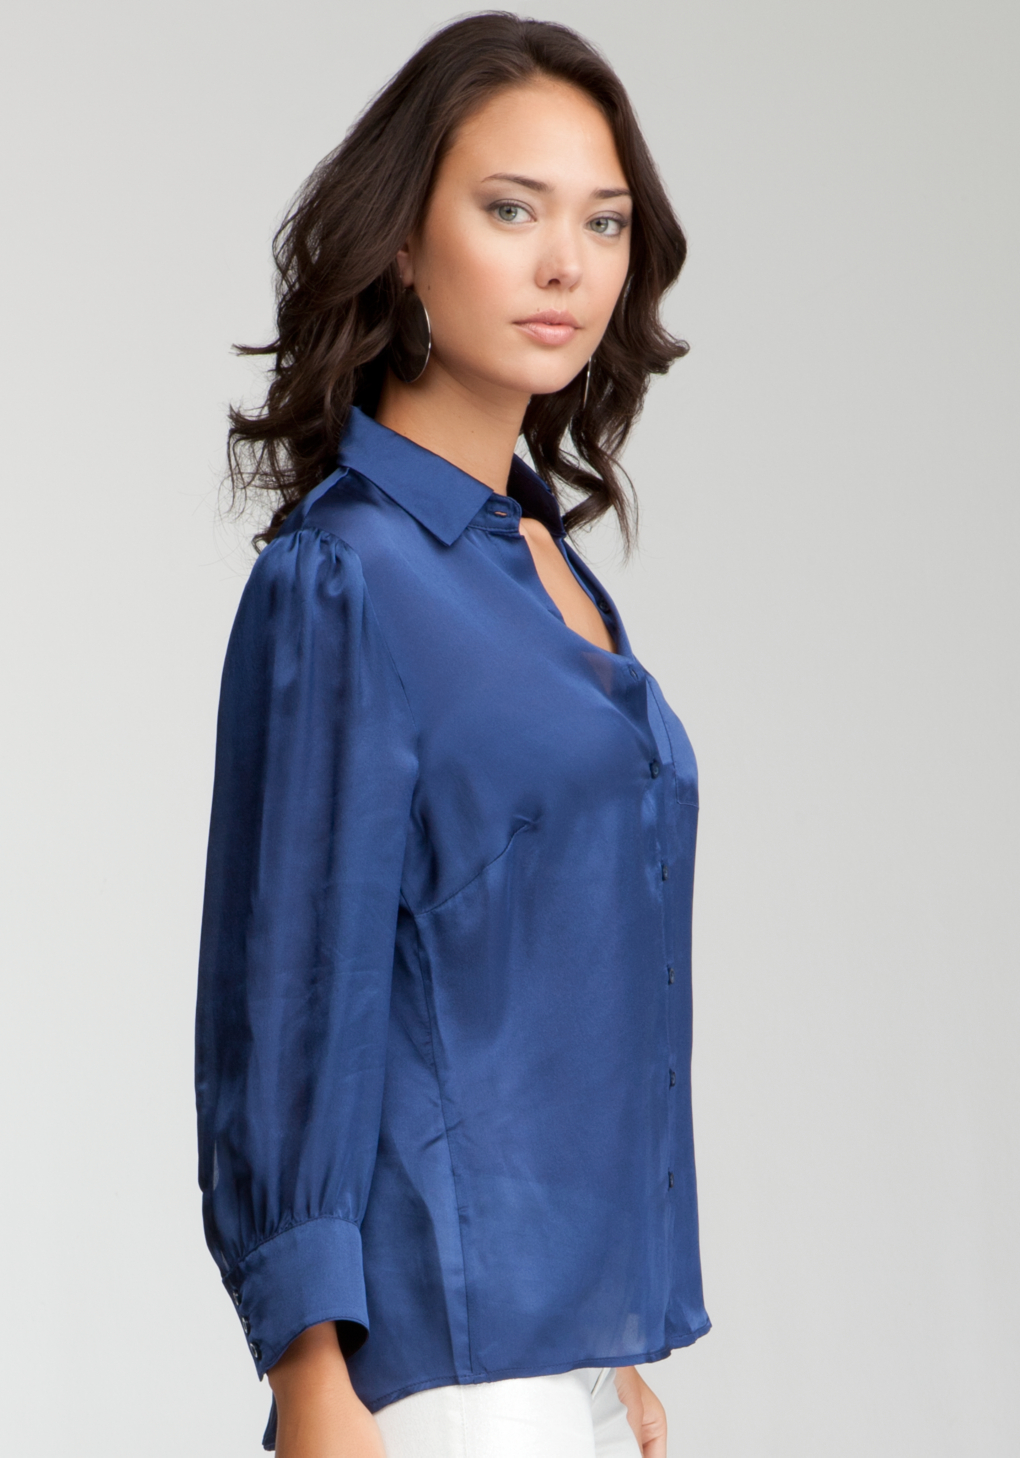 Bebe Simple Satin Silk Button Up Blouse in Blue - Lyst